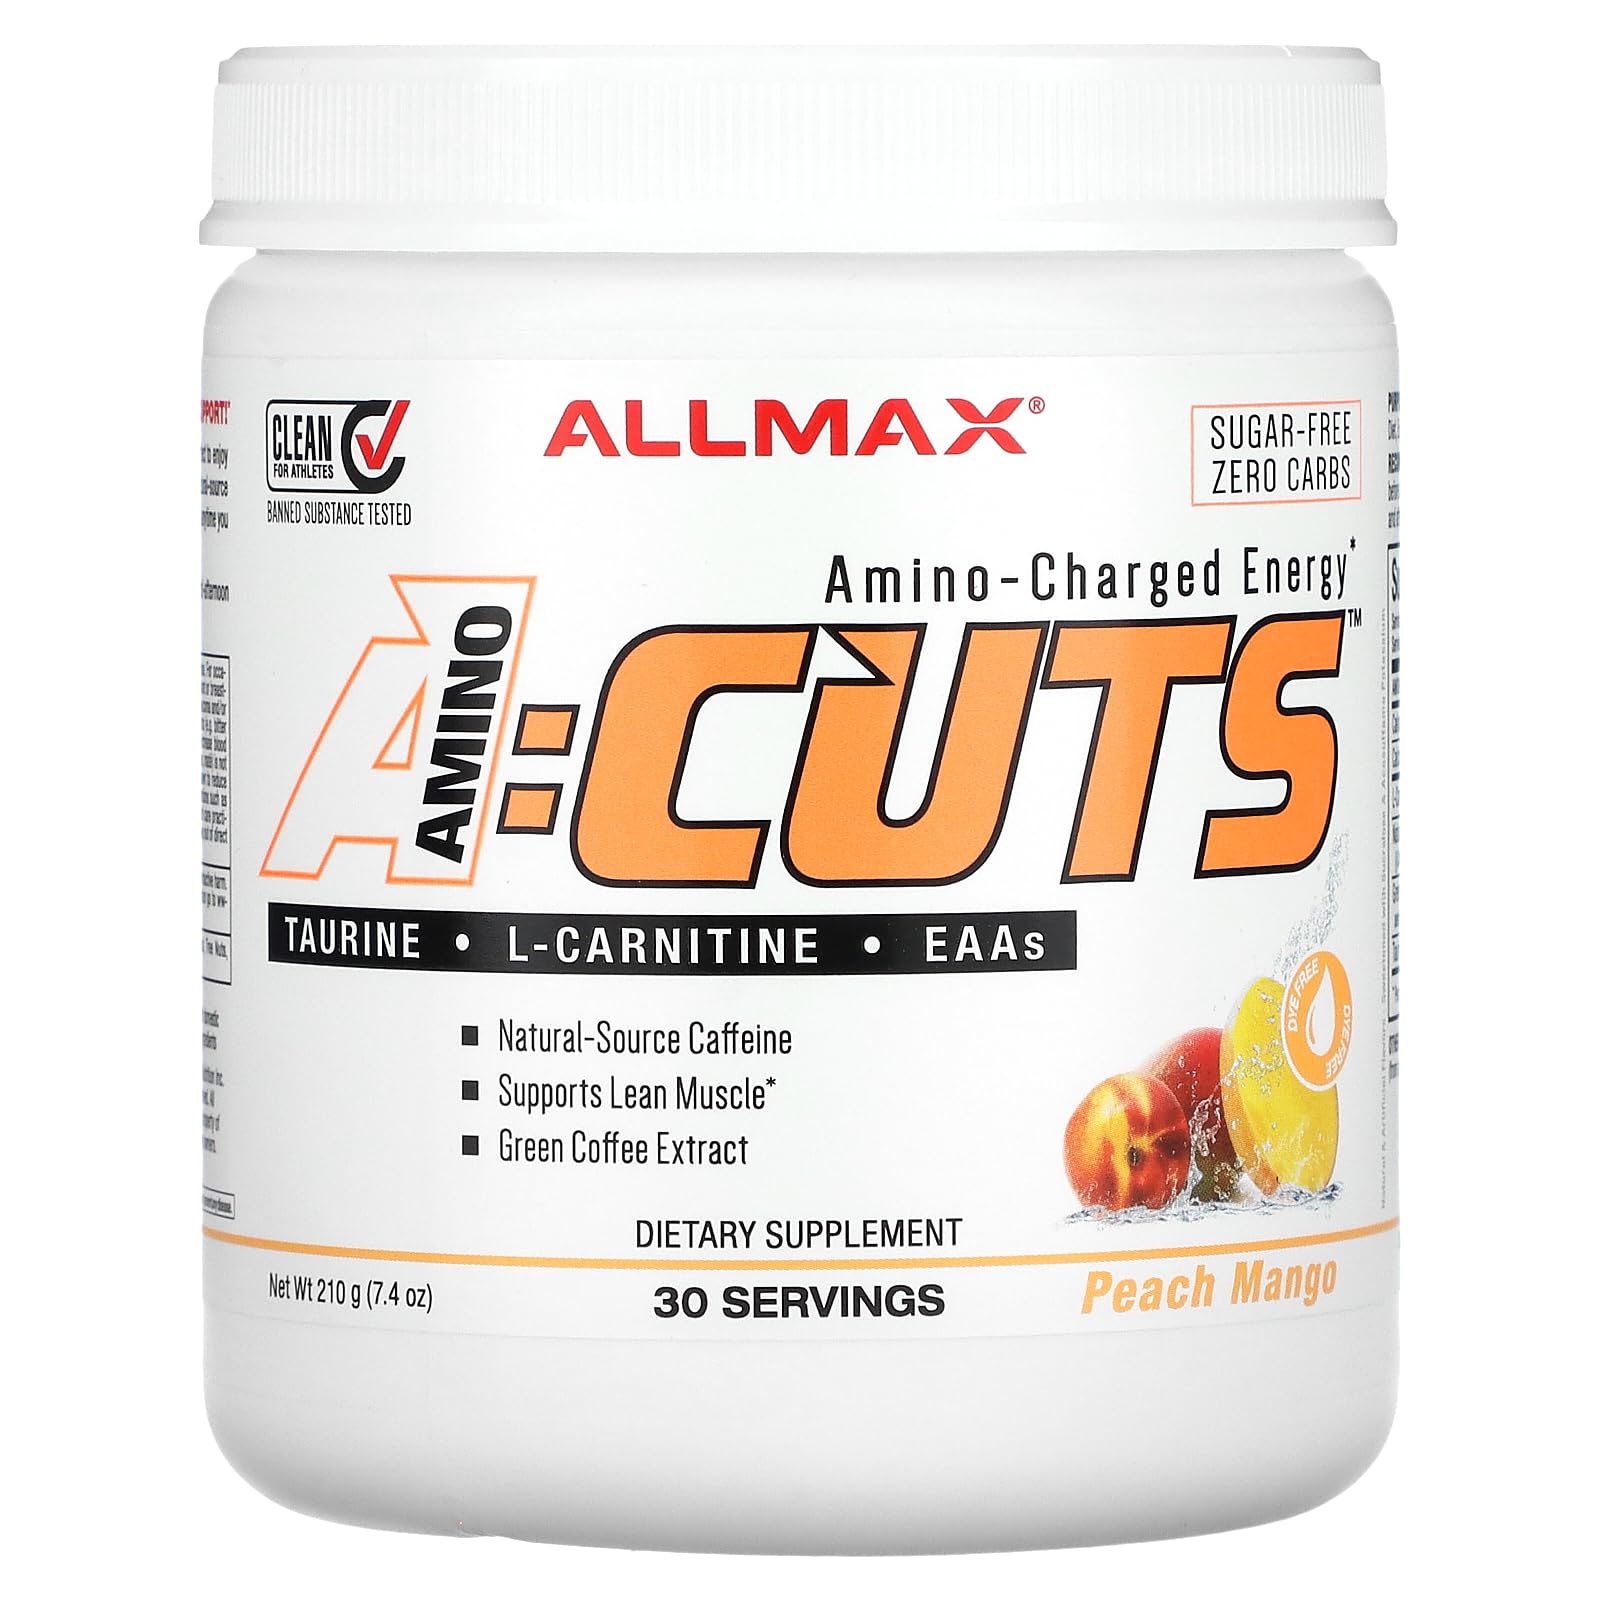 ALLMAX A:CUTS Amino-Charged Energy Drink, Peach Mango - 210 g - with Caffeine, Green Coffee Extract, L-Carnitine & 2000 mg of Taurine - Sugar & Gluten Free - 30 Servings